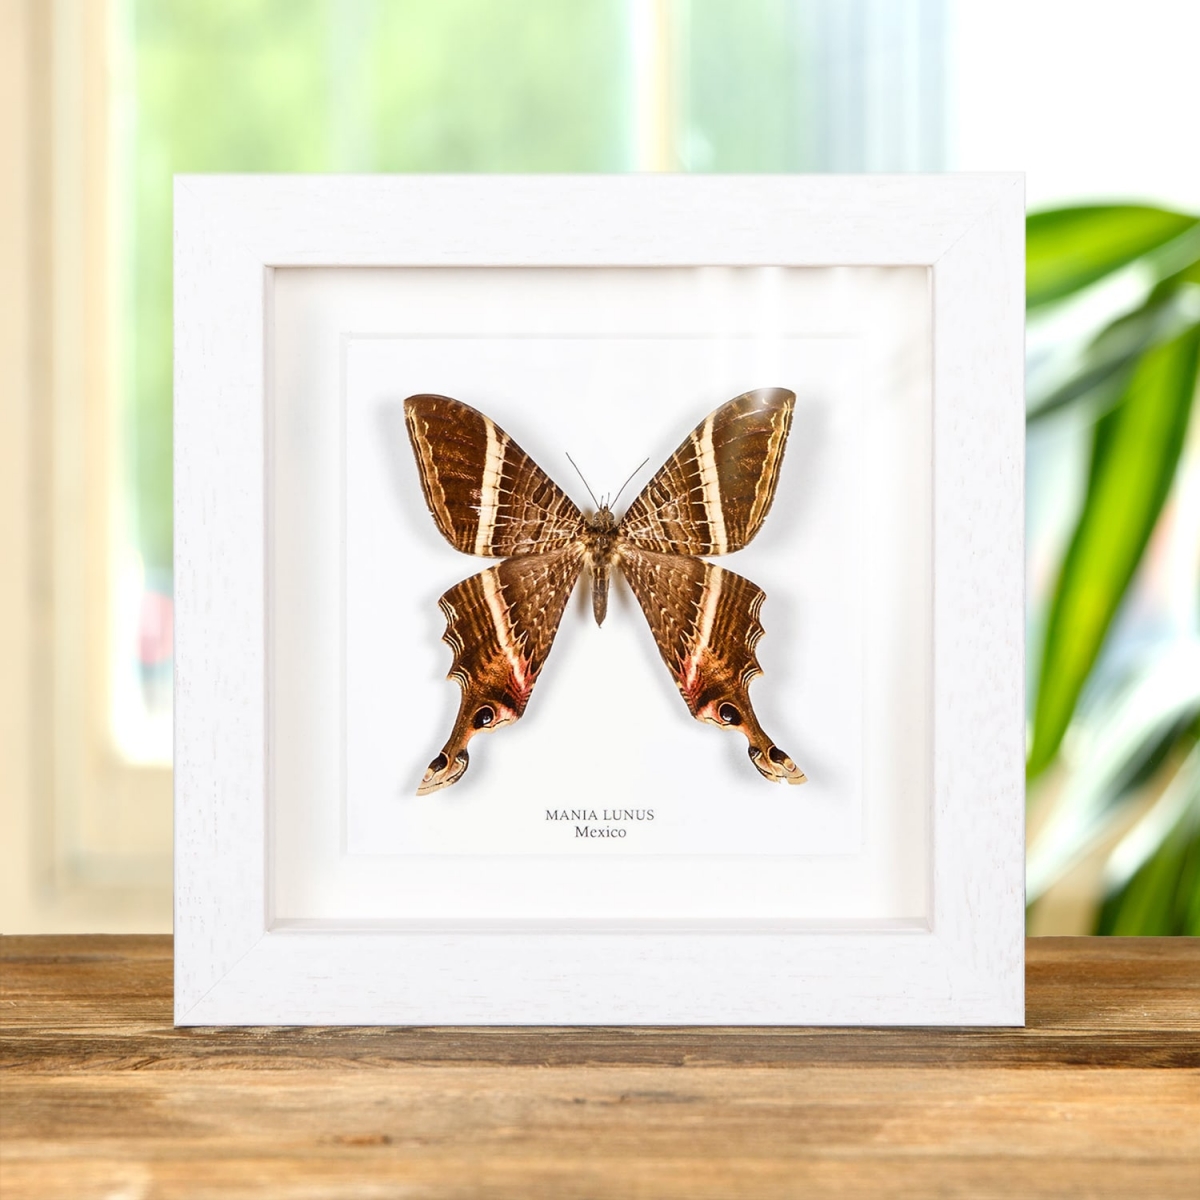 Mania lunus Moth In Box Frame from Mexico